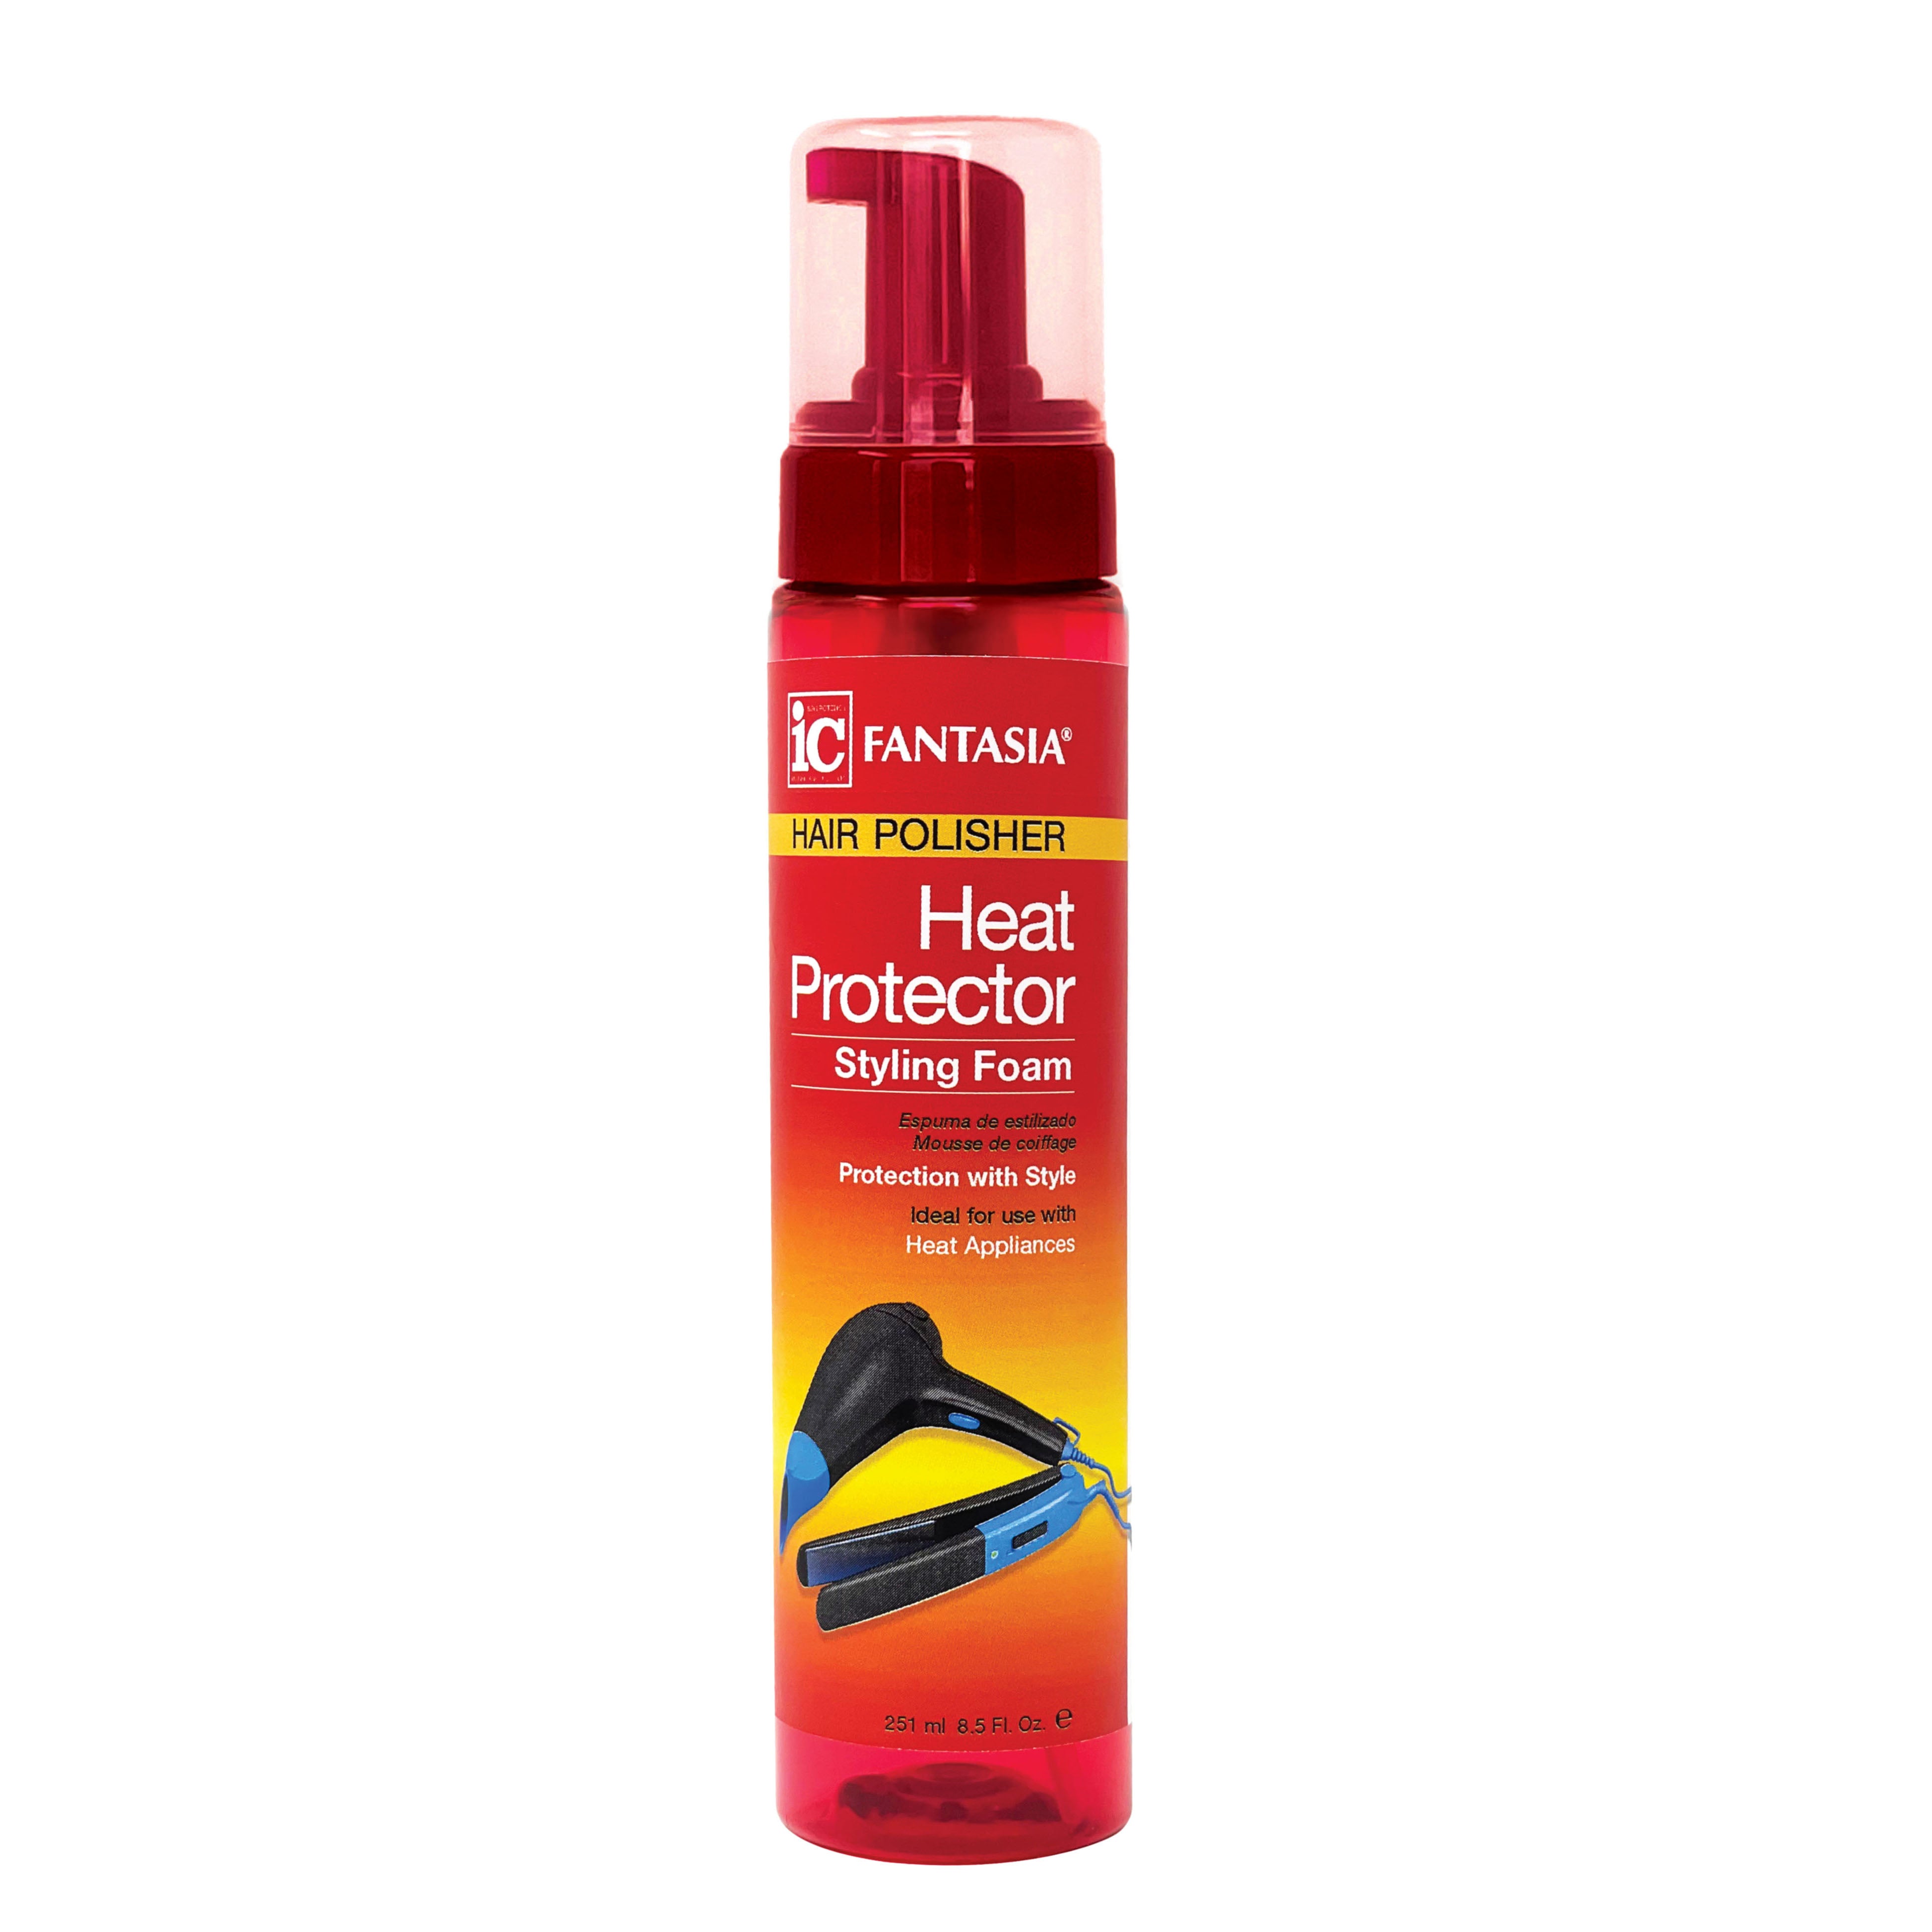 HEAT PROTECTOR STYLING FOAM – Hair Fantasia - OZ) Care (8.5 NEW! Industries